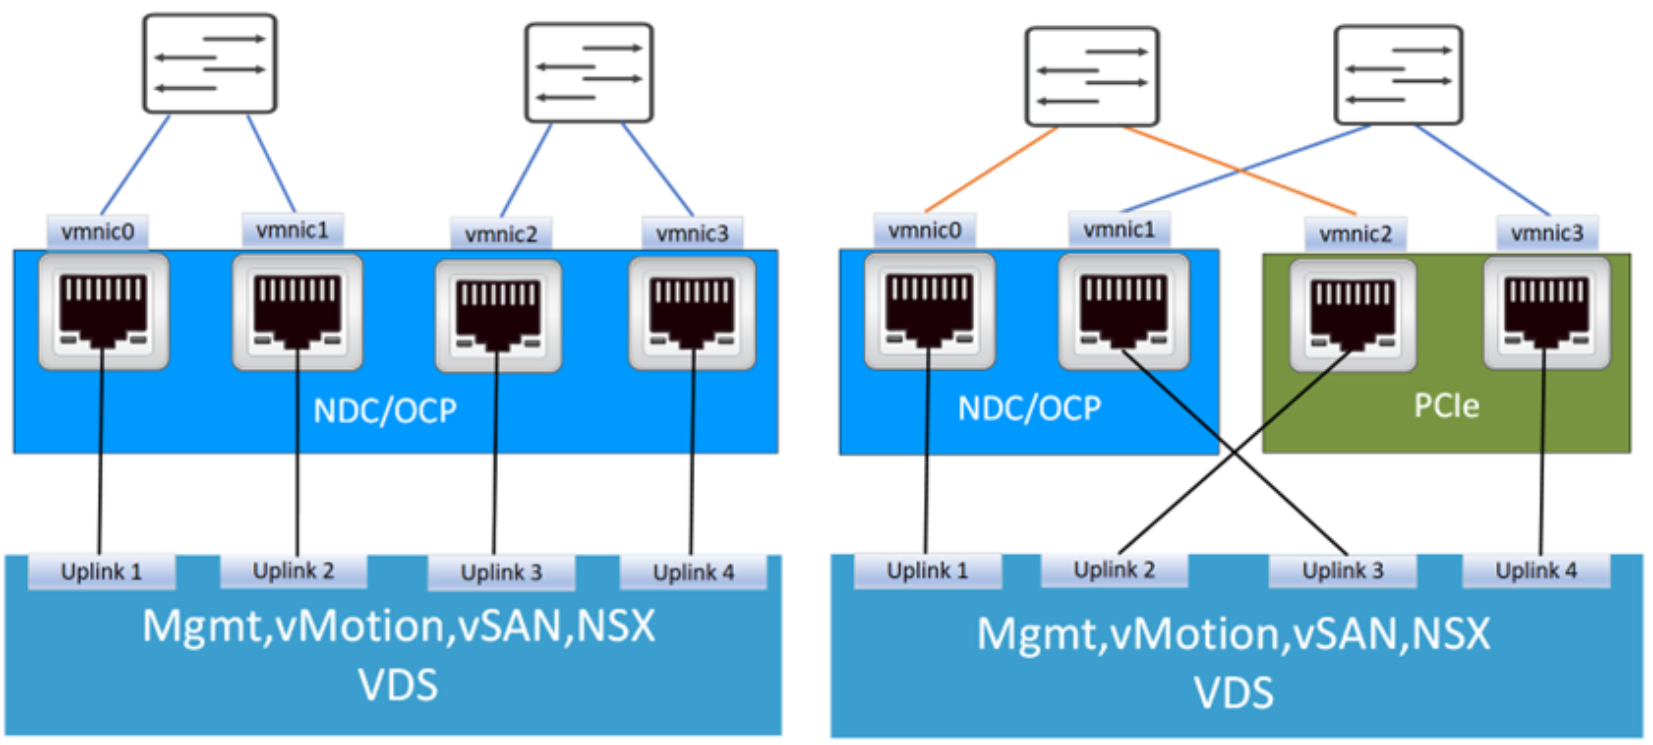 This picture shows connectivity options for VxRail nodes with 4 NICs with a single VDS.